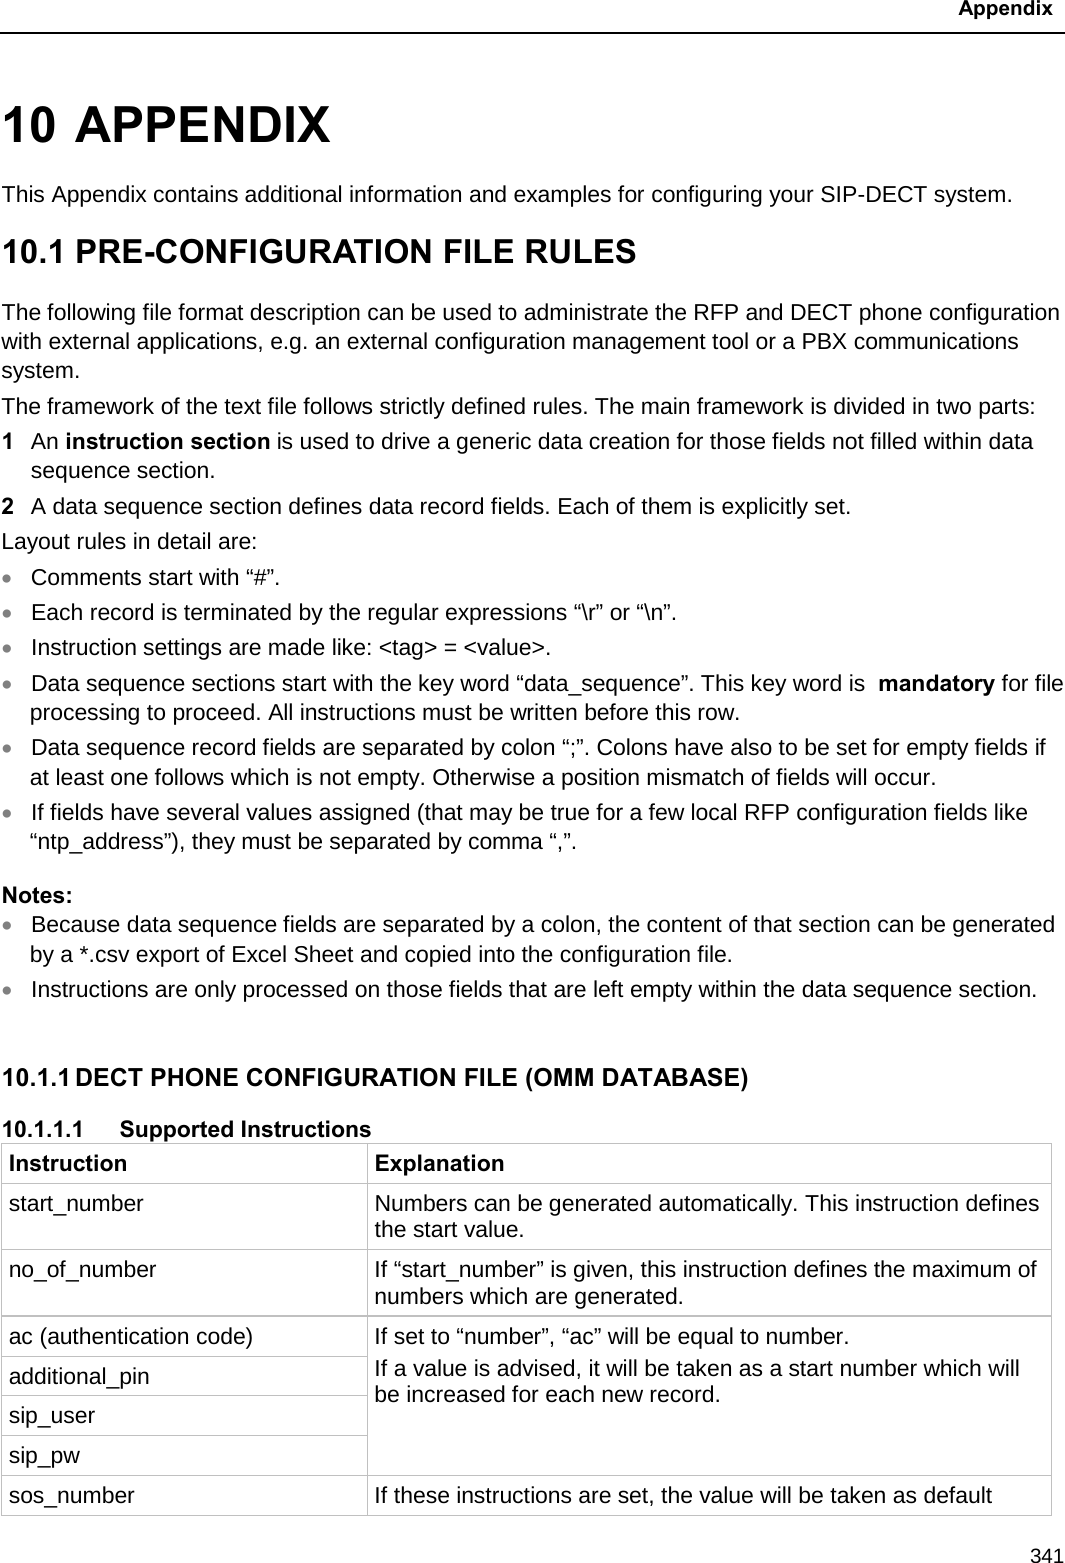  Appendix  341 10 APPENDIX This Appendix contains additional information and examples for configuring your SIP-DECT system.  10.1 PRE-CONFIGURATION FILE RULES  The following file format description can be used to administrate the RFP and DECT phone configuration with external applications, e.g. an external configuration management tool or a PBX communications system. The framework of the text file follows strictly defined rules. The main framework is divided in two parts: 1  An instruction section is used to drive a generic data creation for those fields not filled within data sequence section.  2  A data sequence section defines data record fields. Each of them is explicitly set.  Layout rules in detail are: • Comments start with “#”. • Each record is terminated by the regular expressions “\r” or “\n”. • Instruction settings are made like: &lt;tag&gt; = &lt;value&gt;.  • Data sequence sections start with the key word “data_sequence”. This key word is  mandatory for file processing to proceed. All instructions must be written before this row. • Data sequence record fields are separated by colon “;”. Colons have also to be set for empty fields if at least one follows which is not empty. Otherwise a position mismatch of fields will occur. • If fields have several values assigned (that may be true for a few local RFP configuration fields like “ntp_address”), they must be separated by comma “,”. Notes:  • Because data sequence fields are separated by a colon, the content of that section can be generated by a *.csv export of Excel Sheet and copied into the configuration file. • Instructions are only processed on those fields that are left empty within the data sequence section.  10.1.1 DECT PHONE CONFIGURATION FILE (OMM DATABASE) 10.1.1.1 Supported Instructions Instruction Explanation start_number Numbers can be generated automatically. This instruction defines the start value. no_of_number If “start_number” is given, this instruction defines the maximum of numbers which are generated. ac (authentication code) If set to “number”, “ac” will be equal to number. If a value is advised, it will be taken as a start number which will be increased for each new record. additional_pin sip_user sip_pw sos_number If these instructions are set, the value will be taken as default 